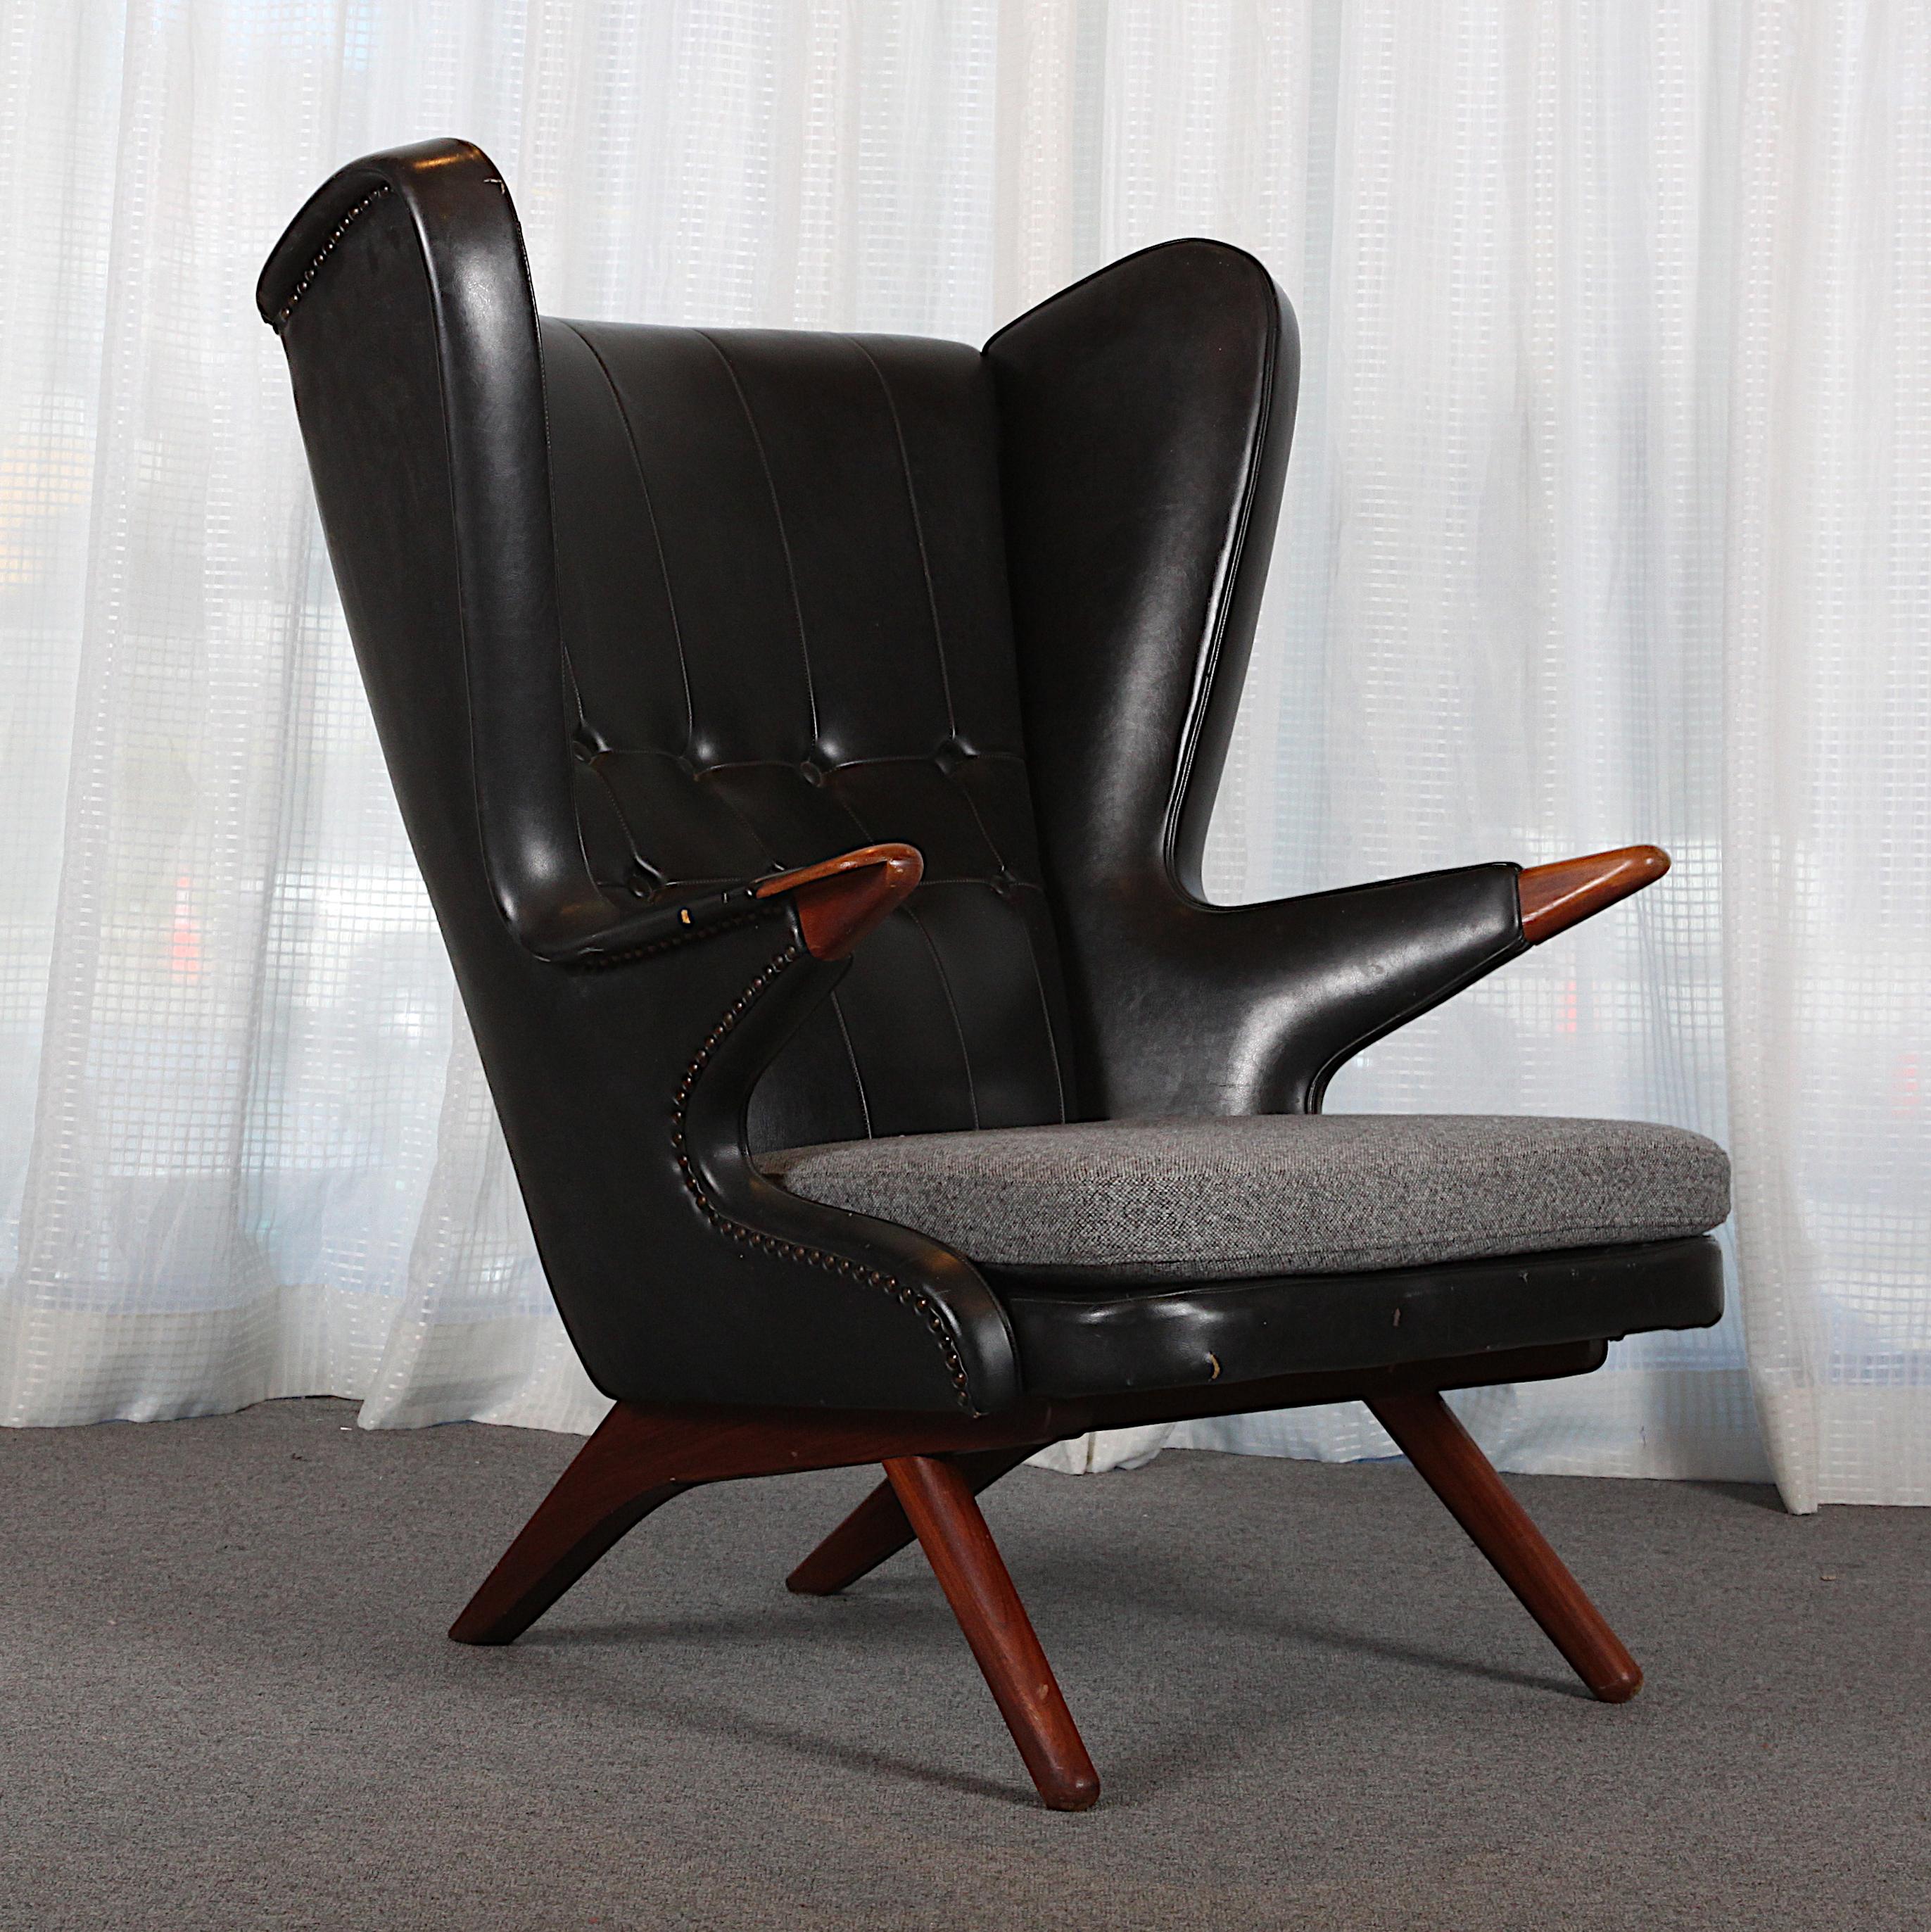 Impressive lounge chair model 91, also known as the “Papa Bear” designed by Svend Skipper and manufactured by Skipper Mobler in Denmark, circa 1960. The legs of the chair are made of high quality rosewood and so are the details in the armrests,